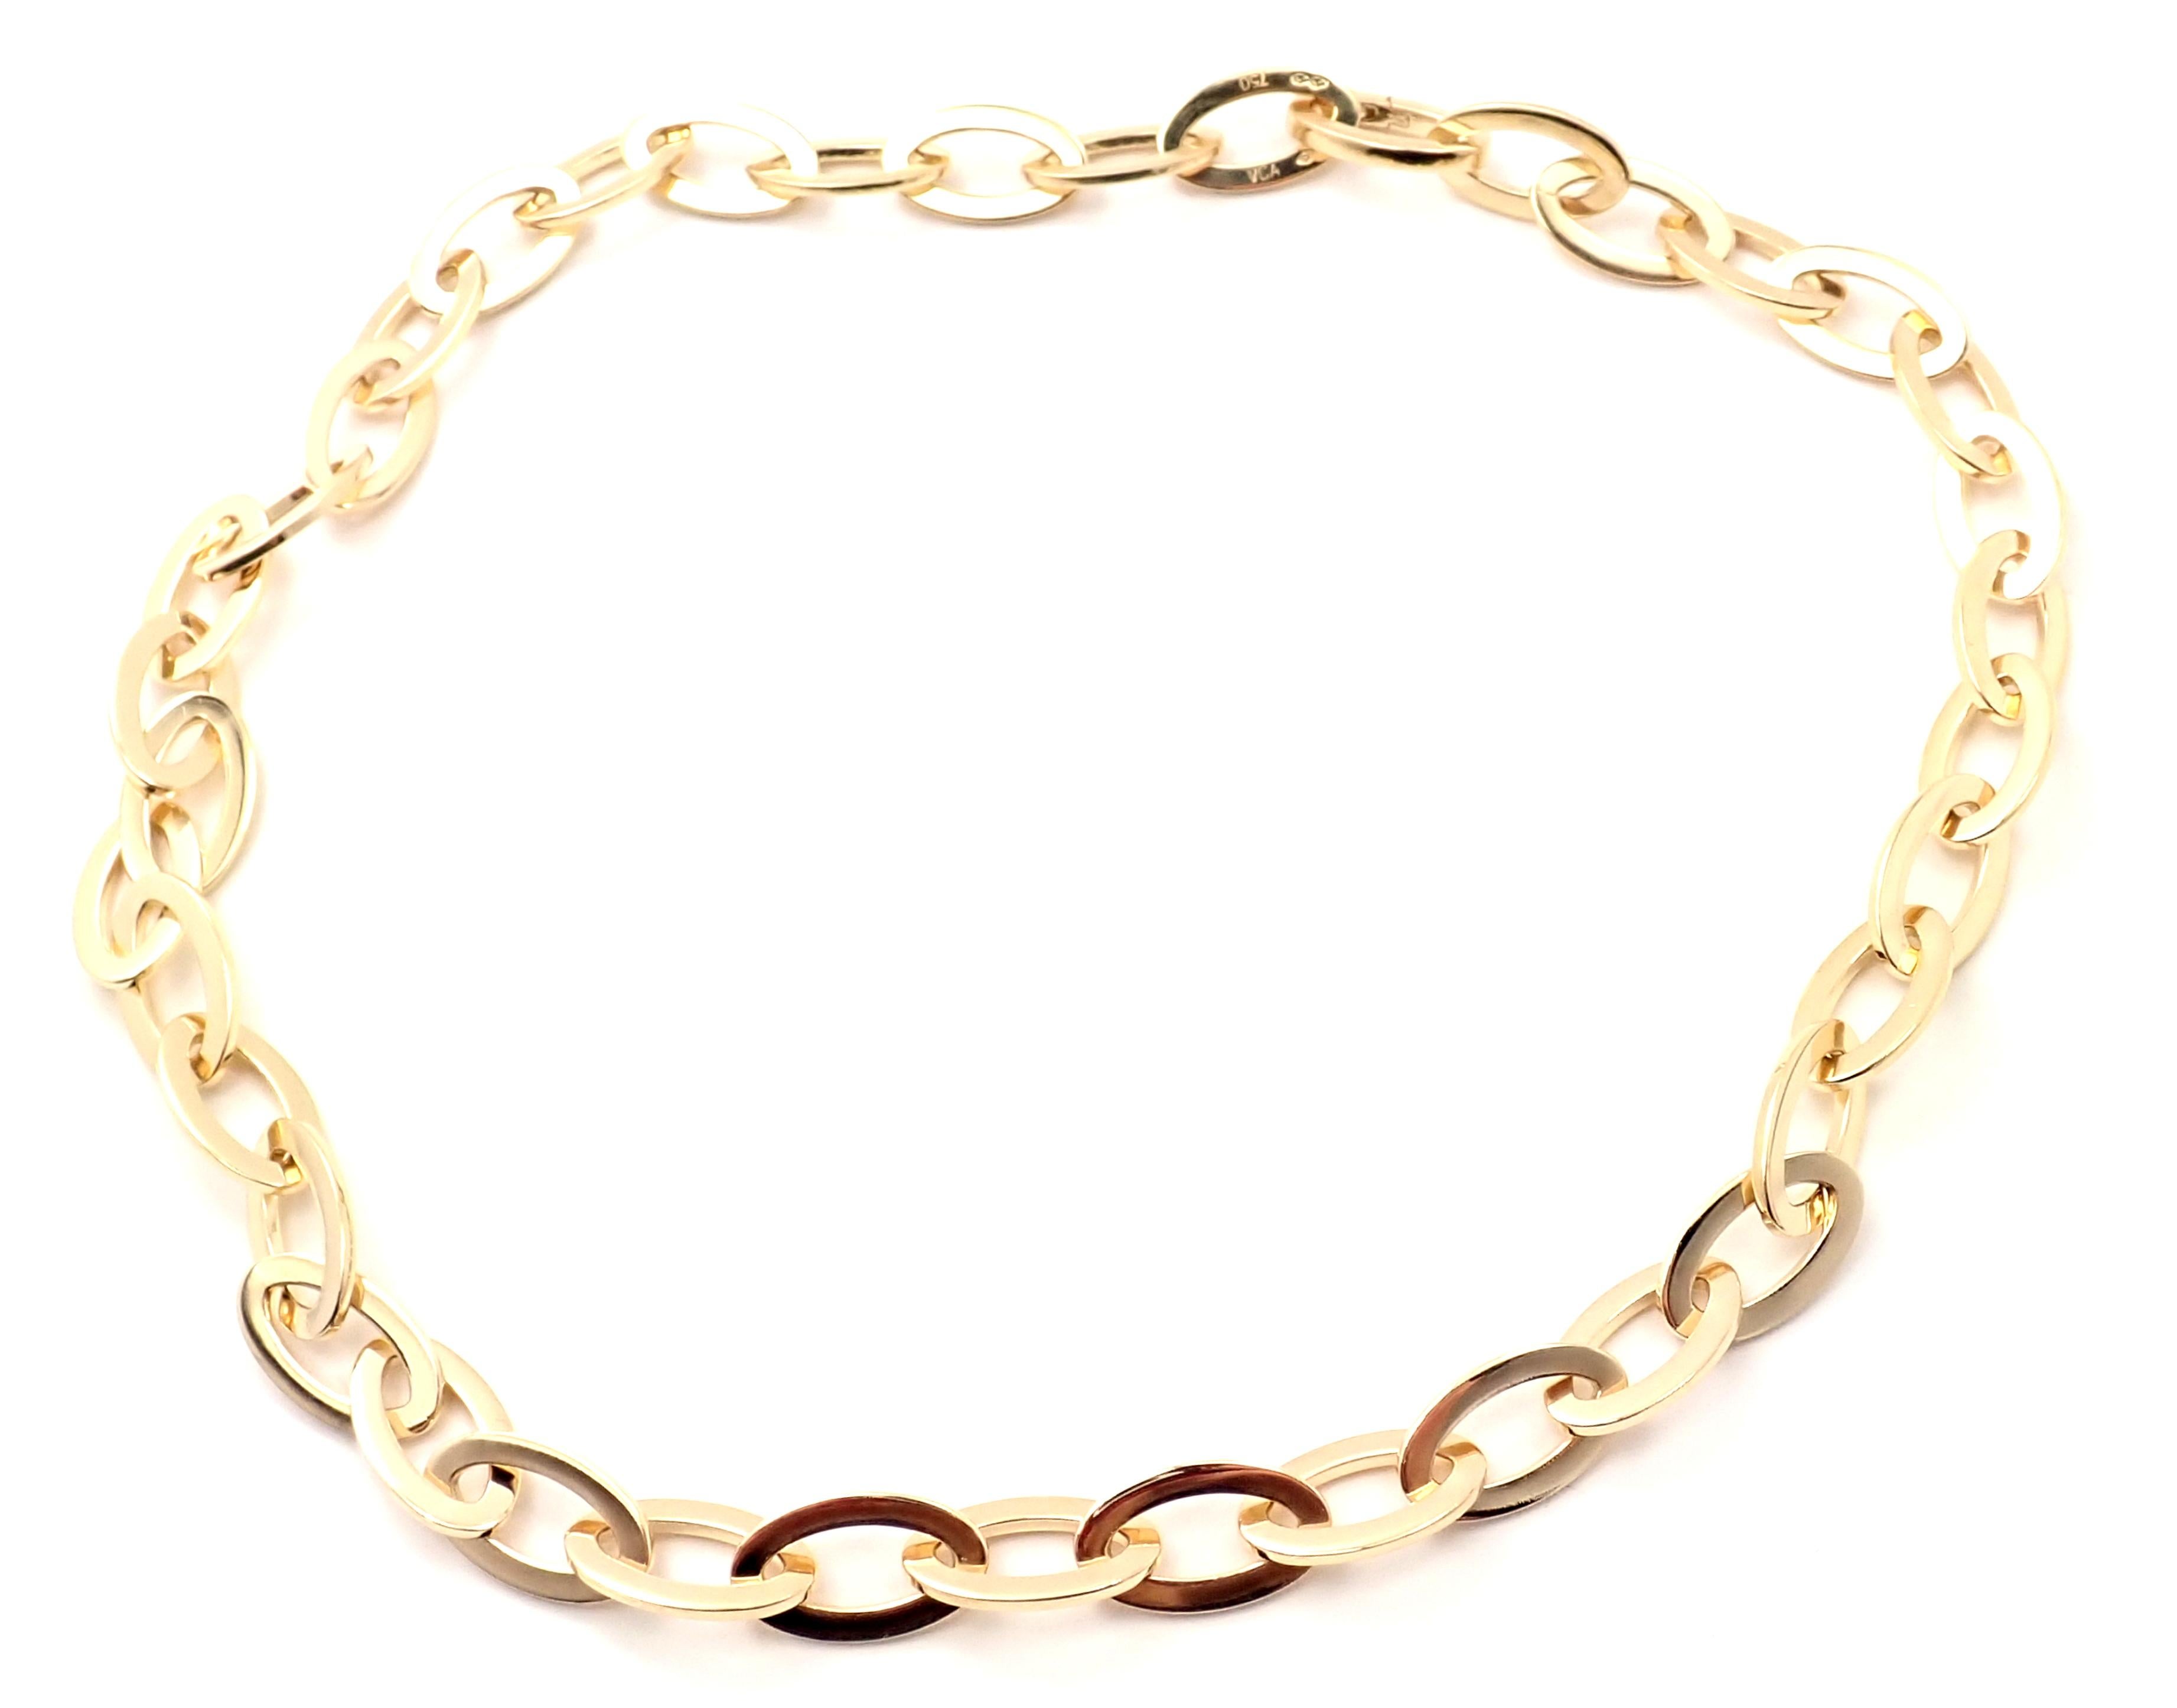 18k Yellow Gold Link Necklace by Van Cleef & Arpels. 
Details: 
Length: 16